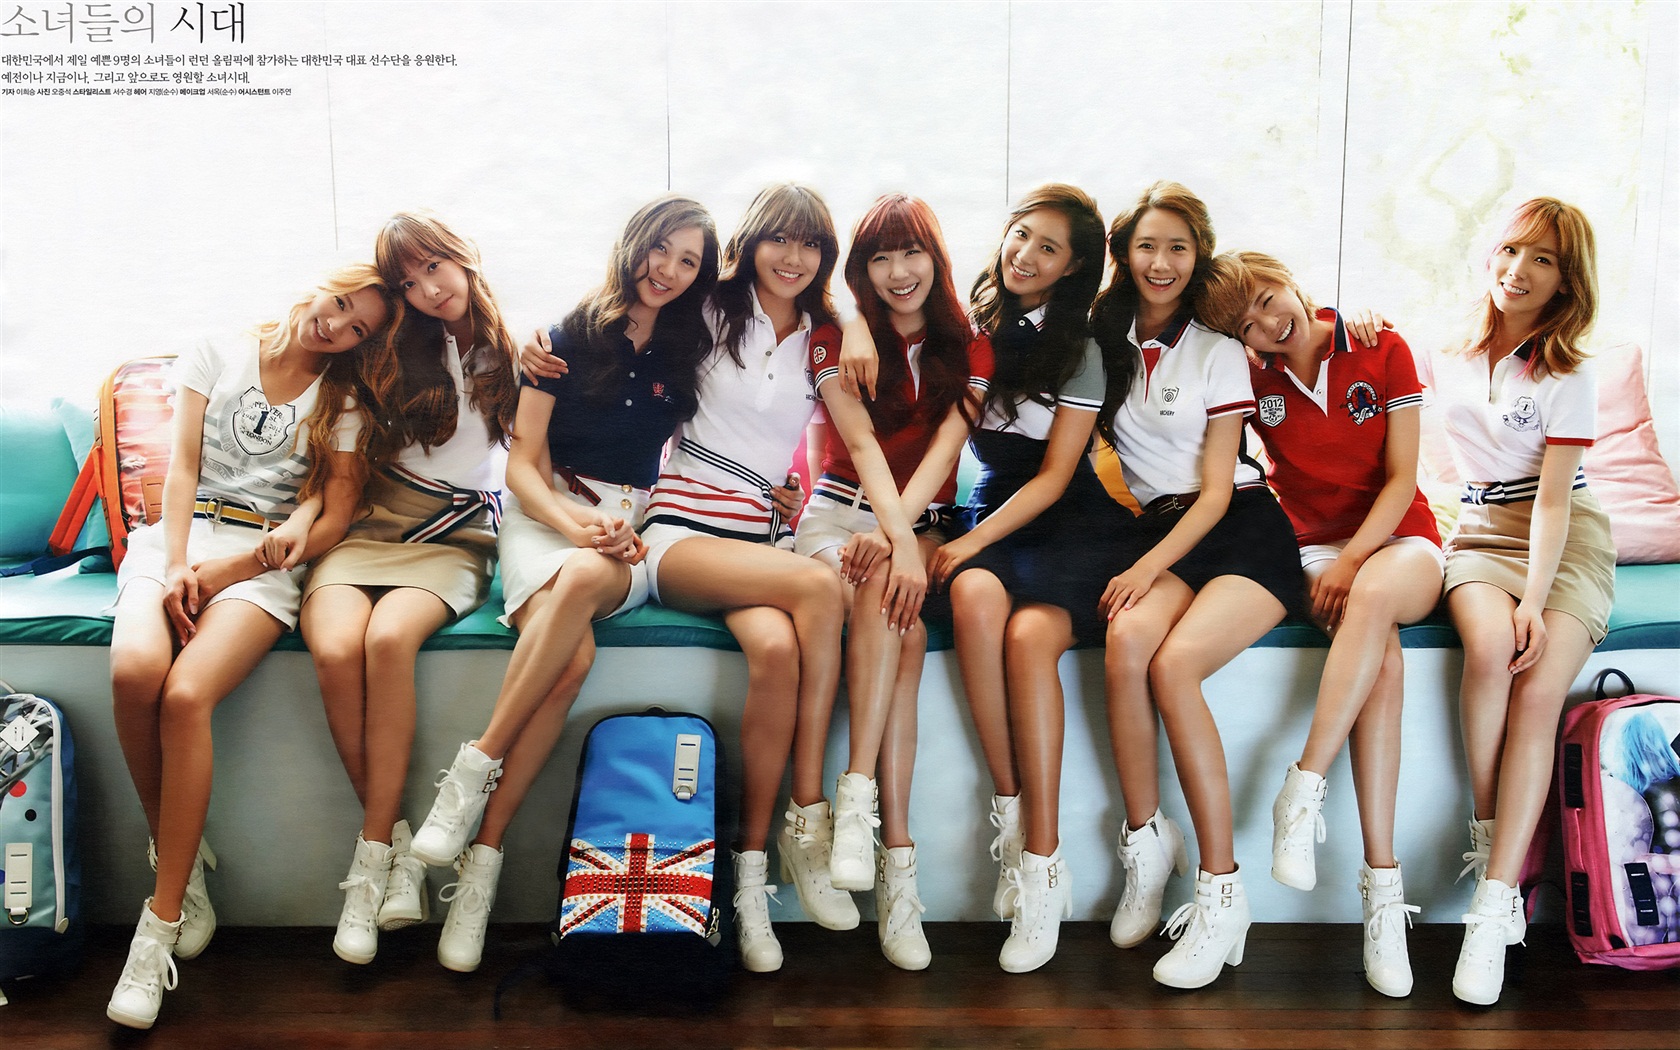 Girls Generation latest HD wallpapers collection #1 - 1680x1050